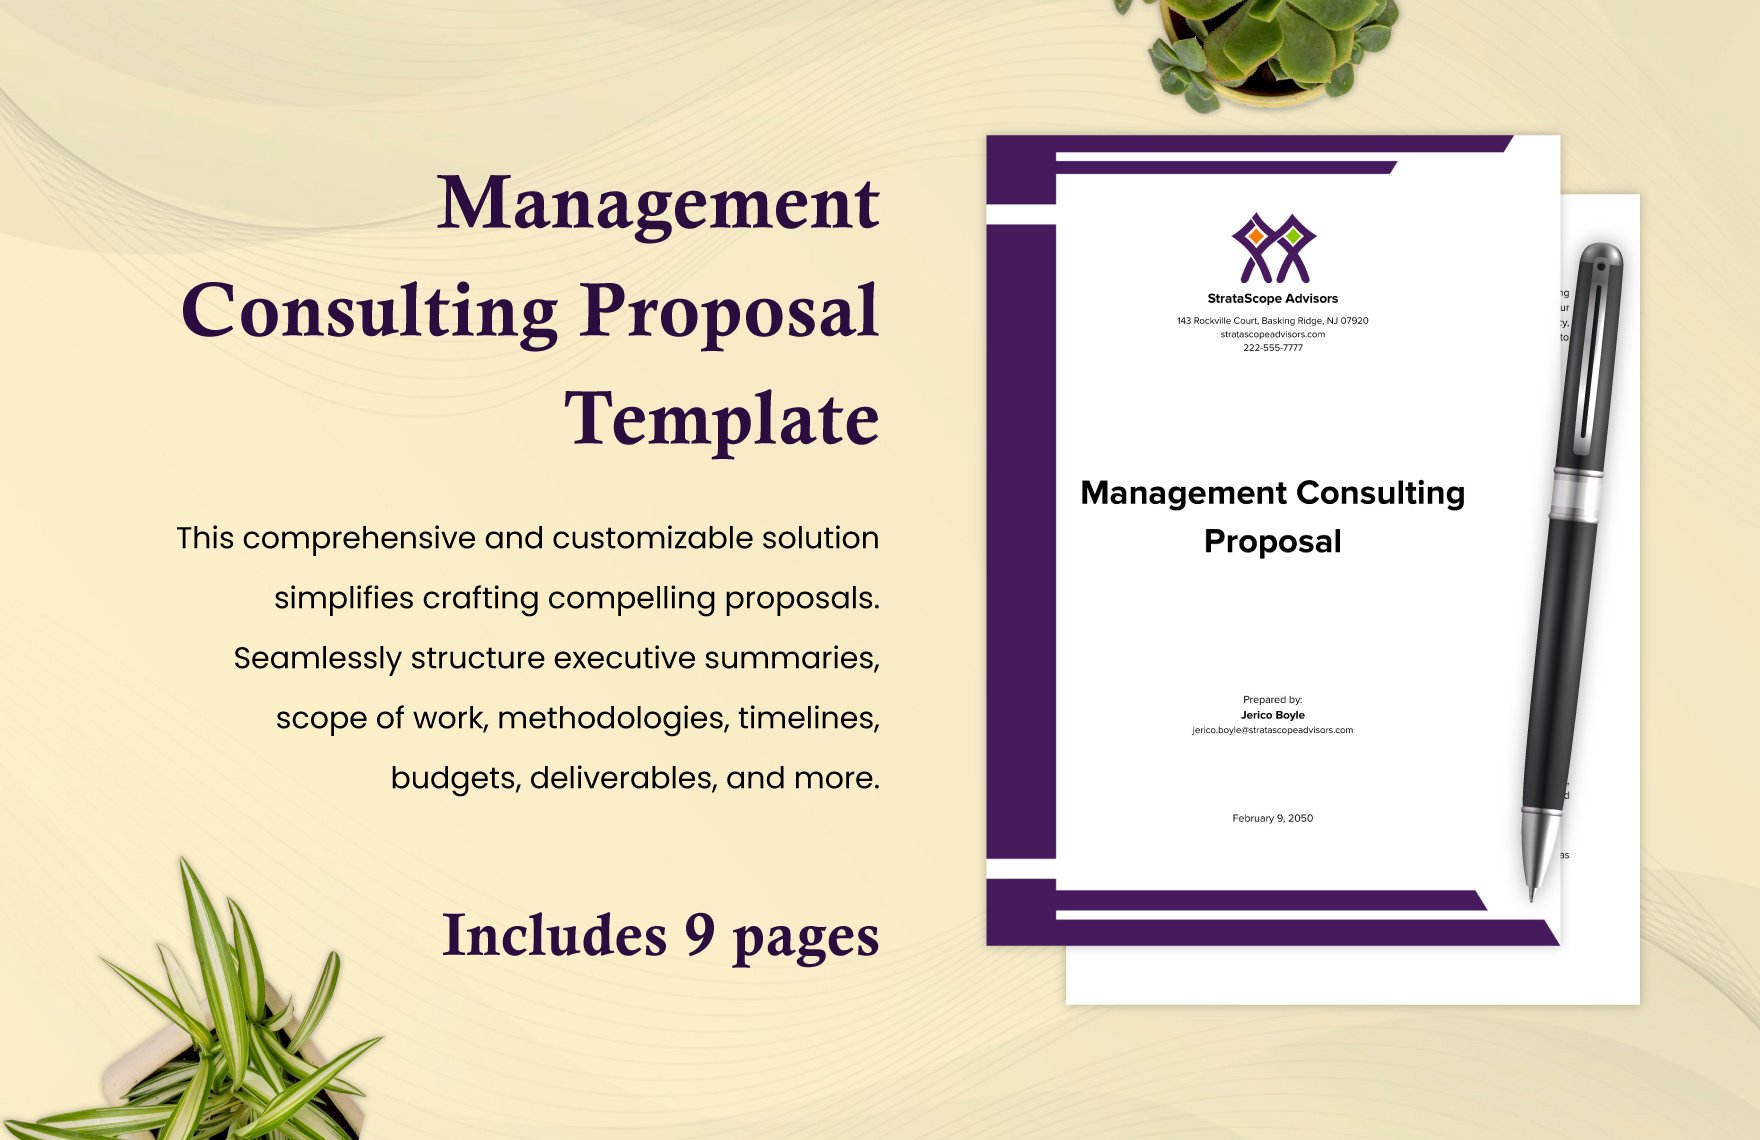 Management Consulting Proposal Template